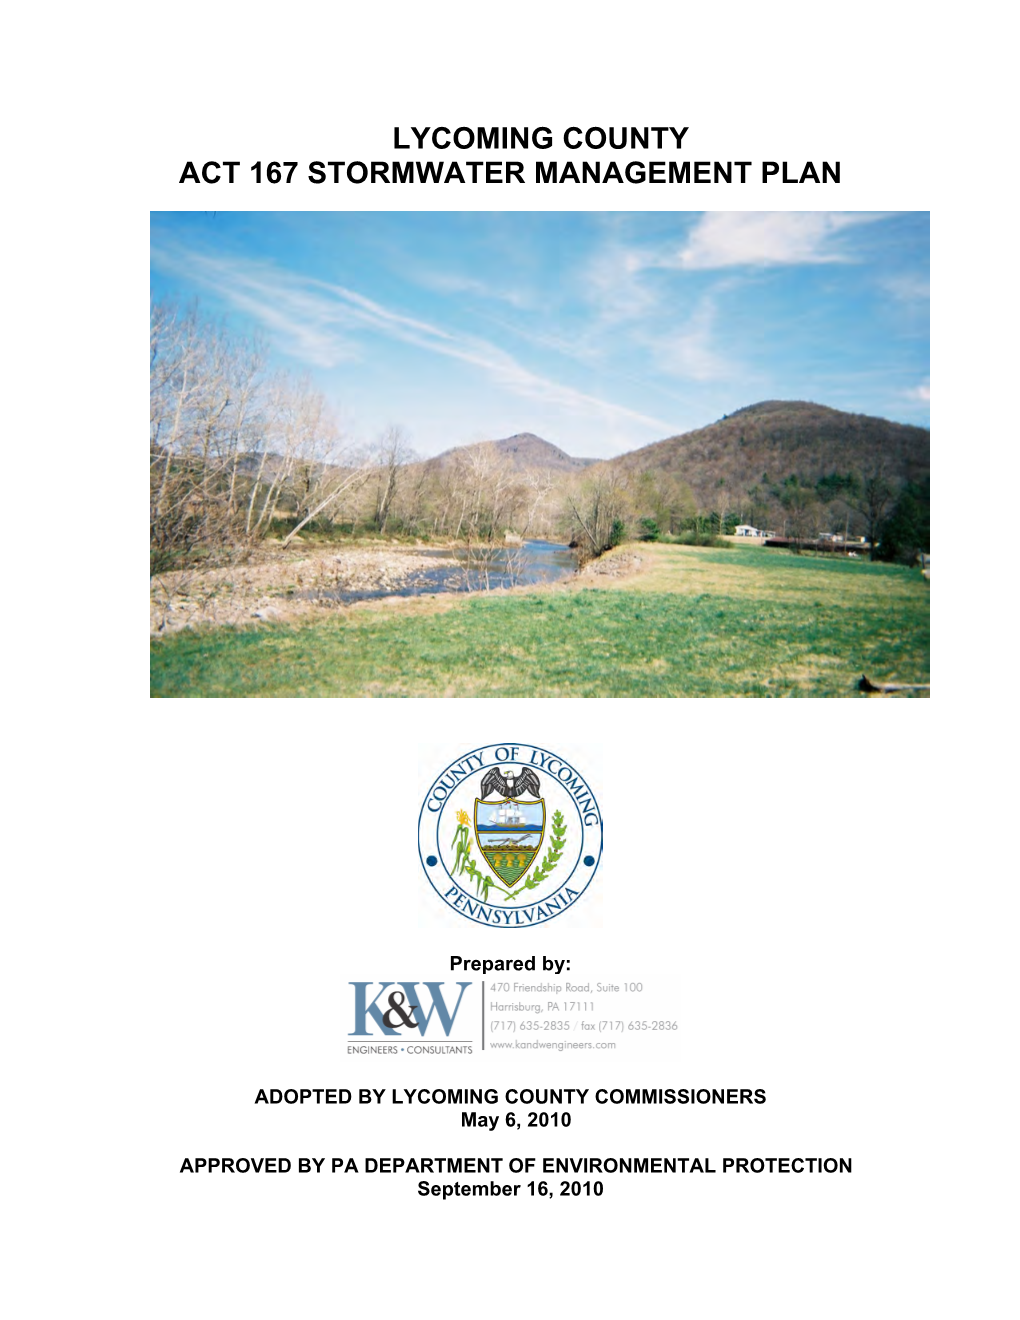 Lycoming County Act 167 Stormwater Management Plan